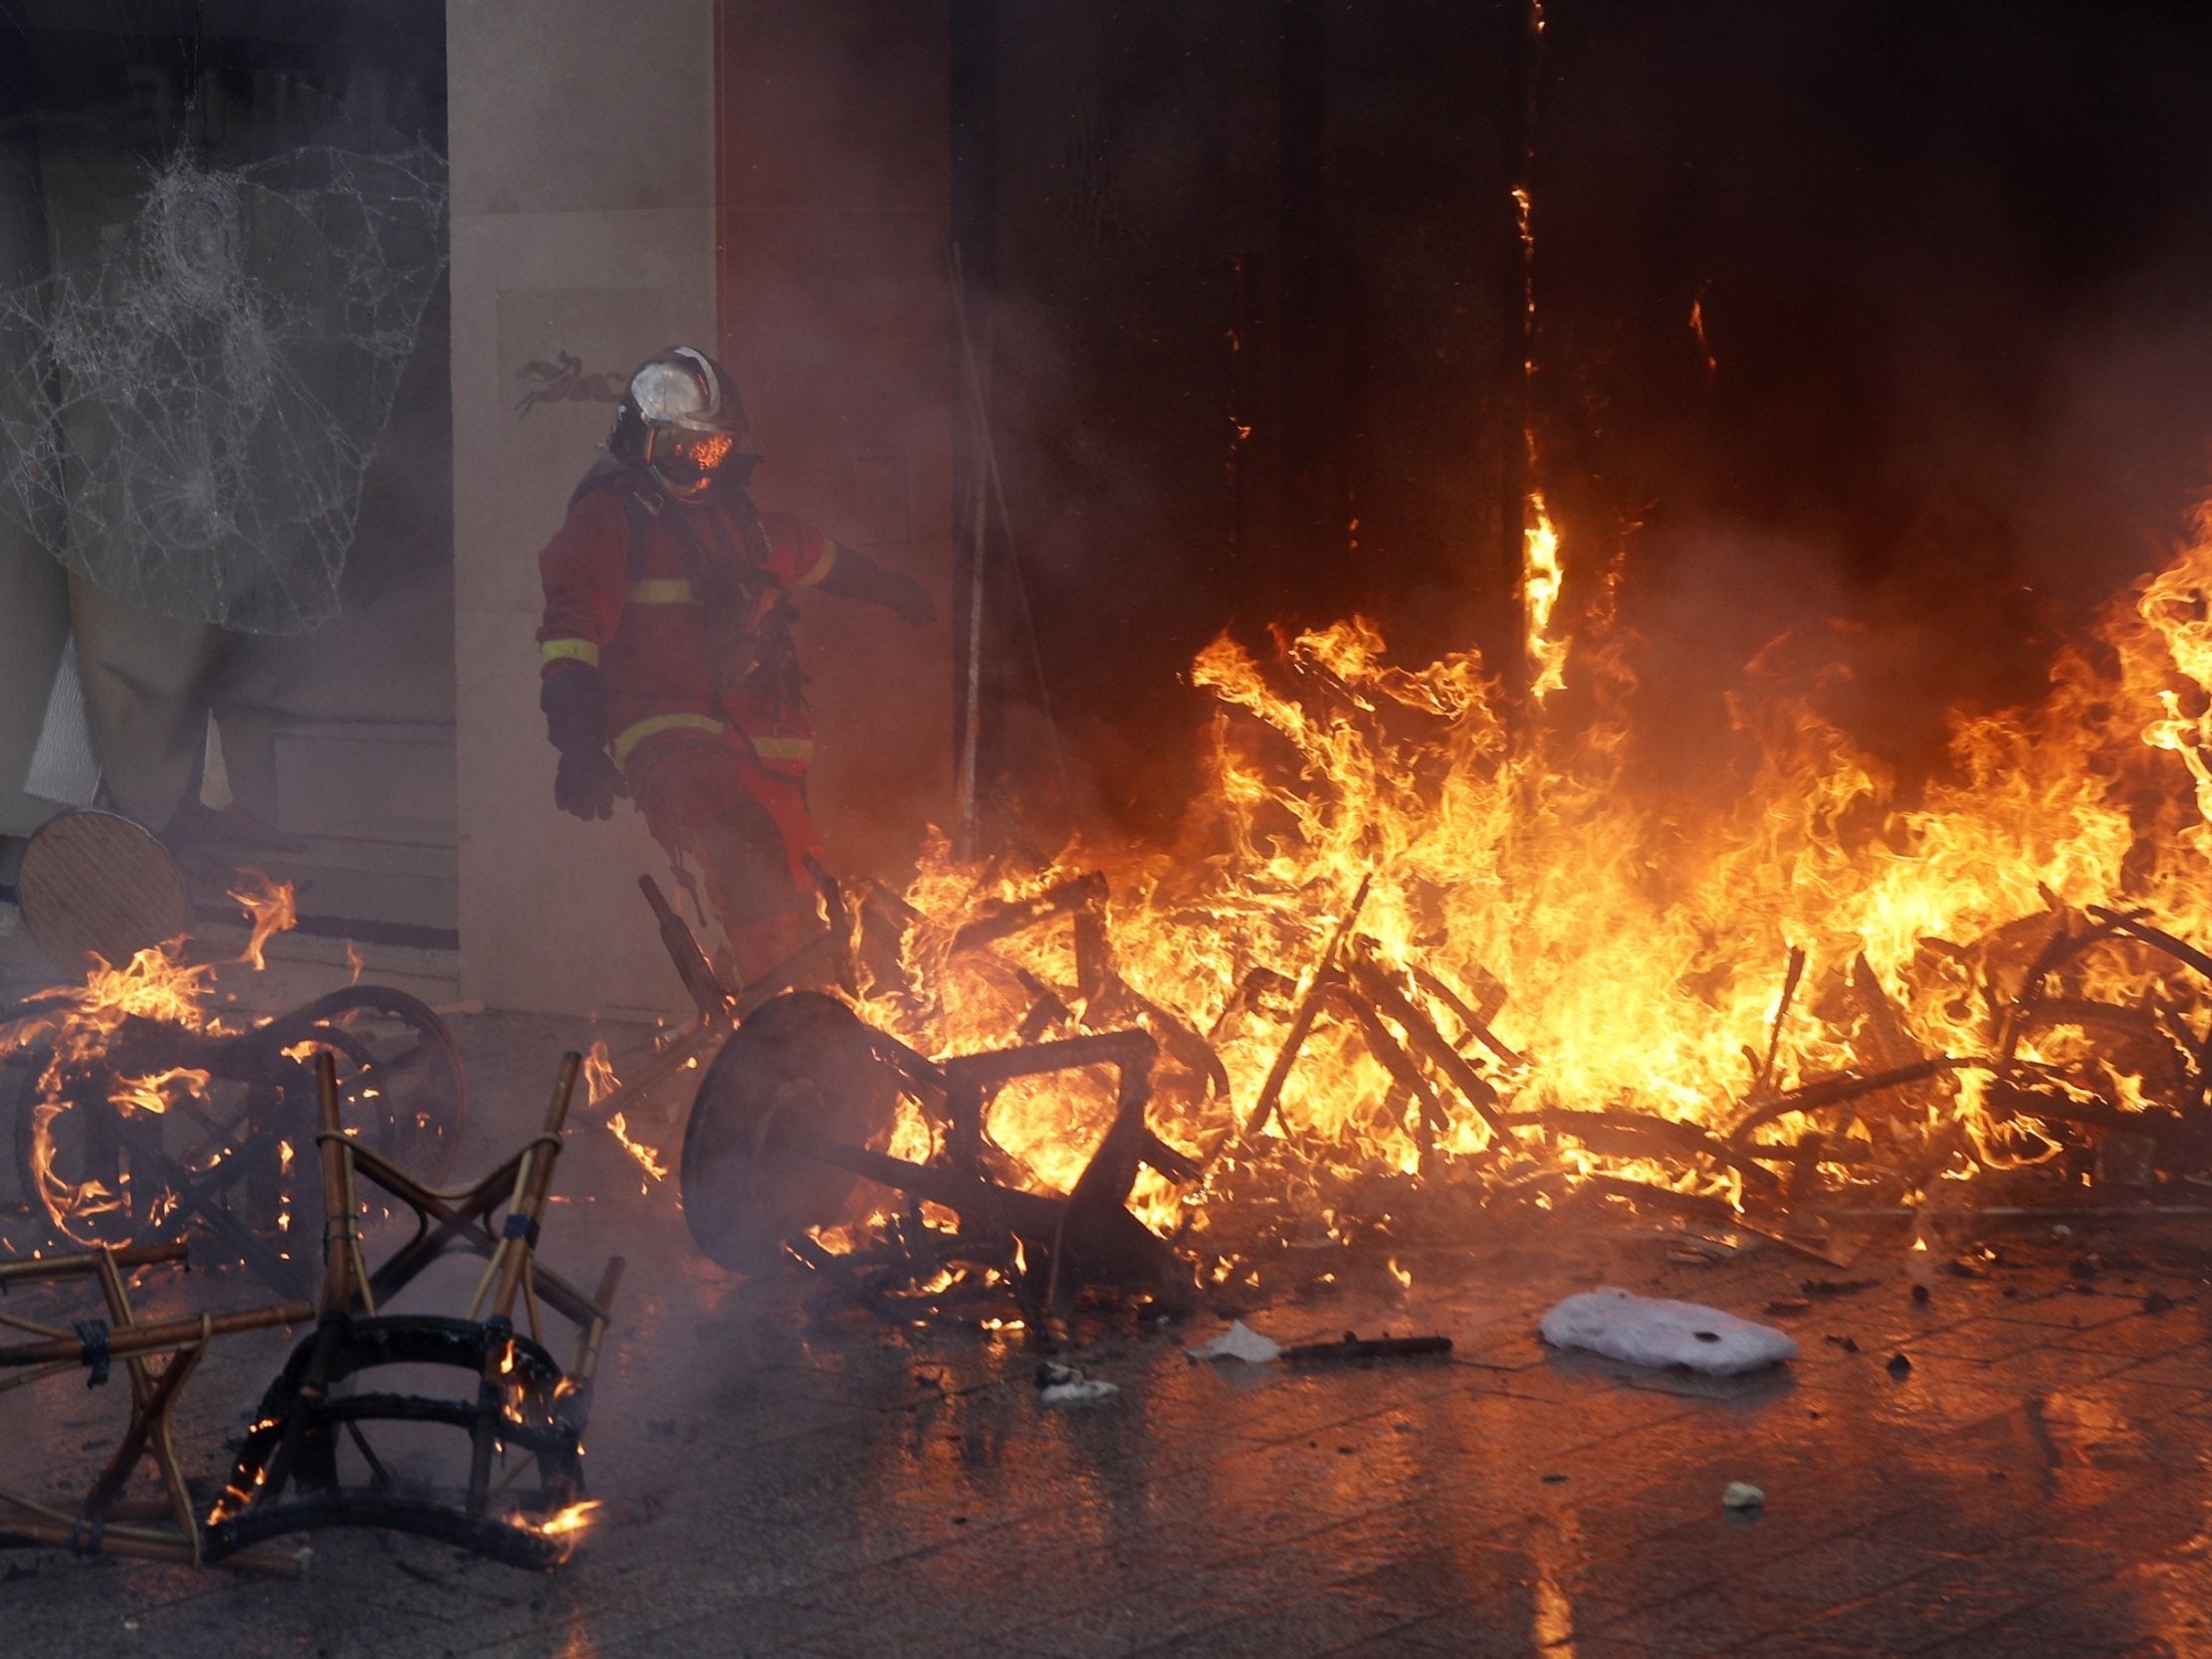 Fireman tries to extinguish a blaze at a luxury store on the Champs Elysees